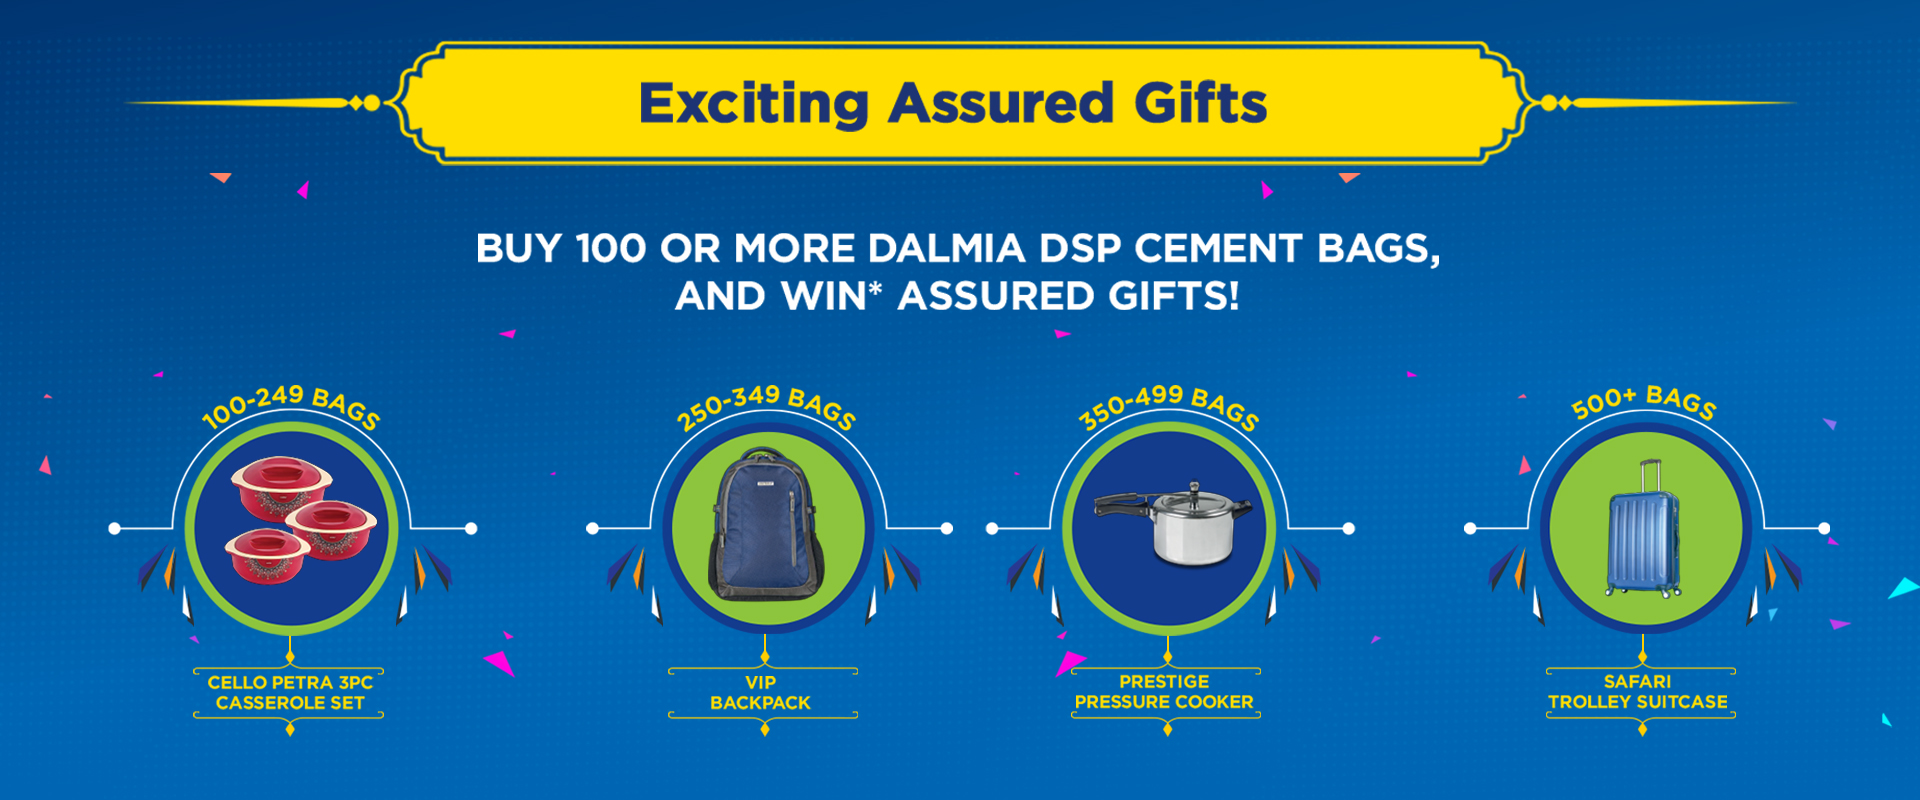 Exciting Assured Gifts